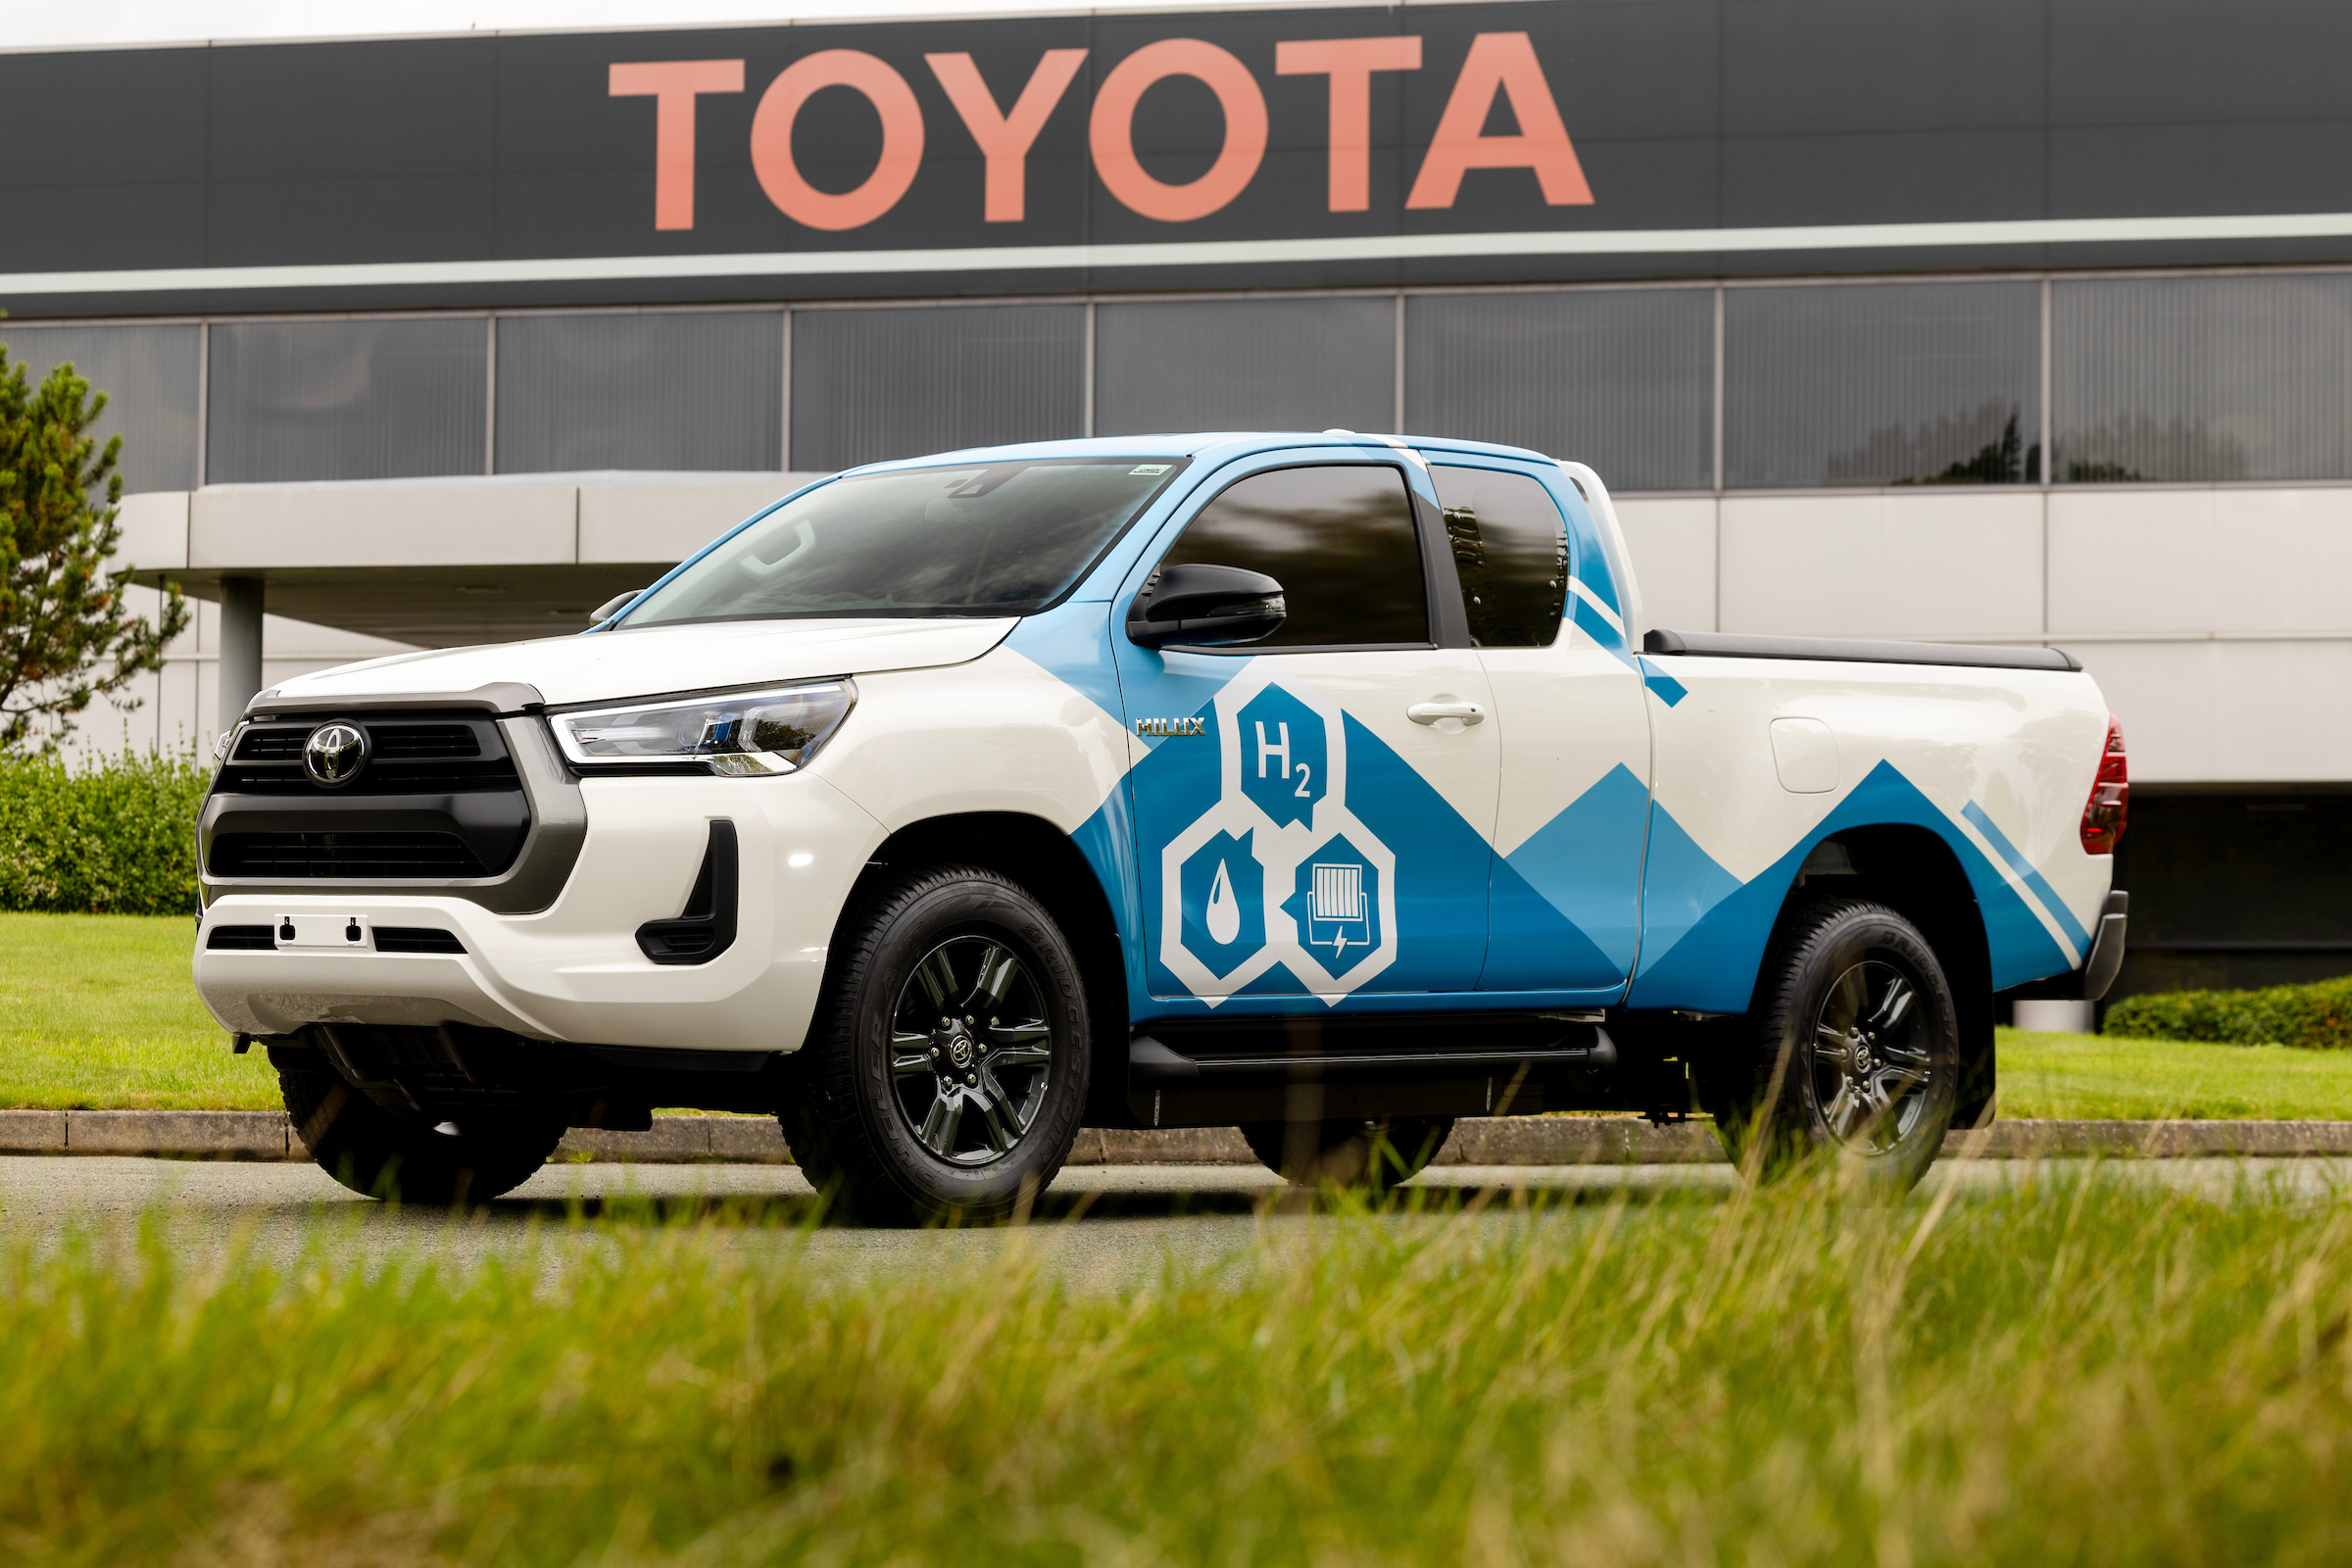 https://e-vehicleinfo.com/global/hydrogen-fuel-cell-electric-hilux-unviled-by-toyota-provides-range-of-600-km/